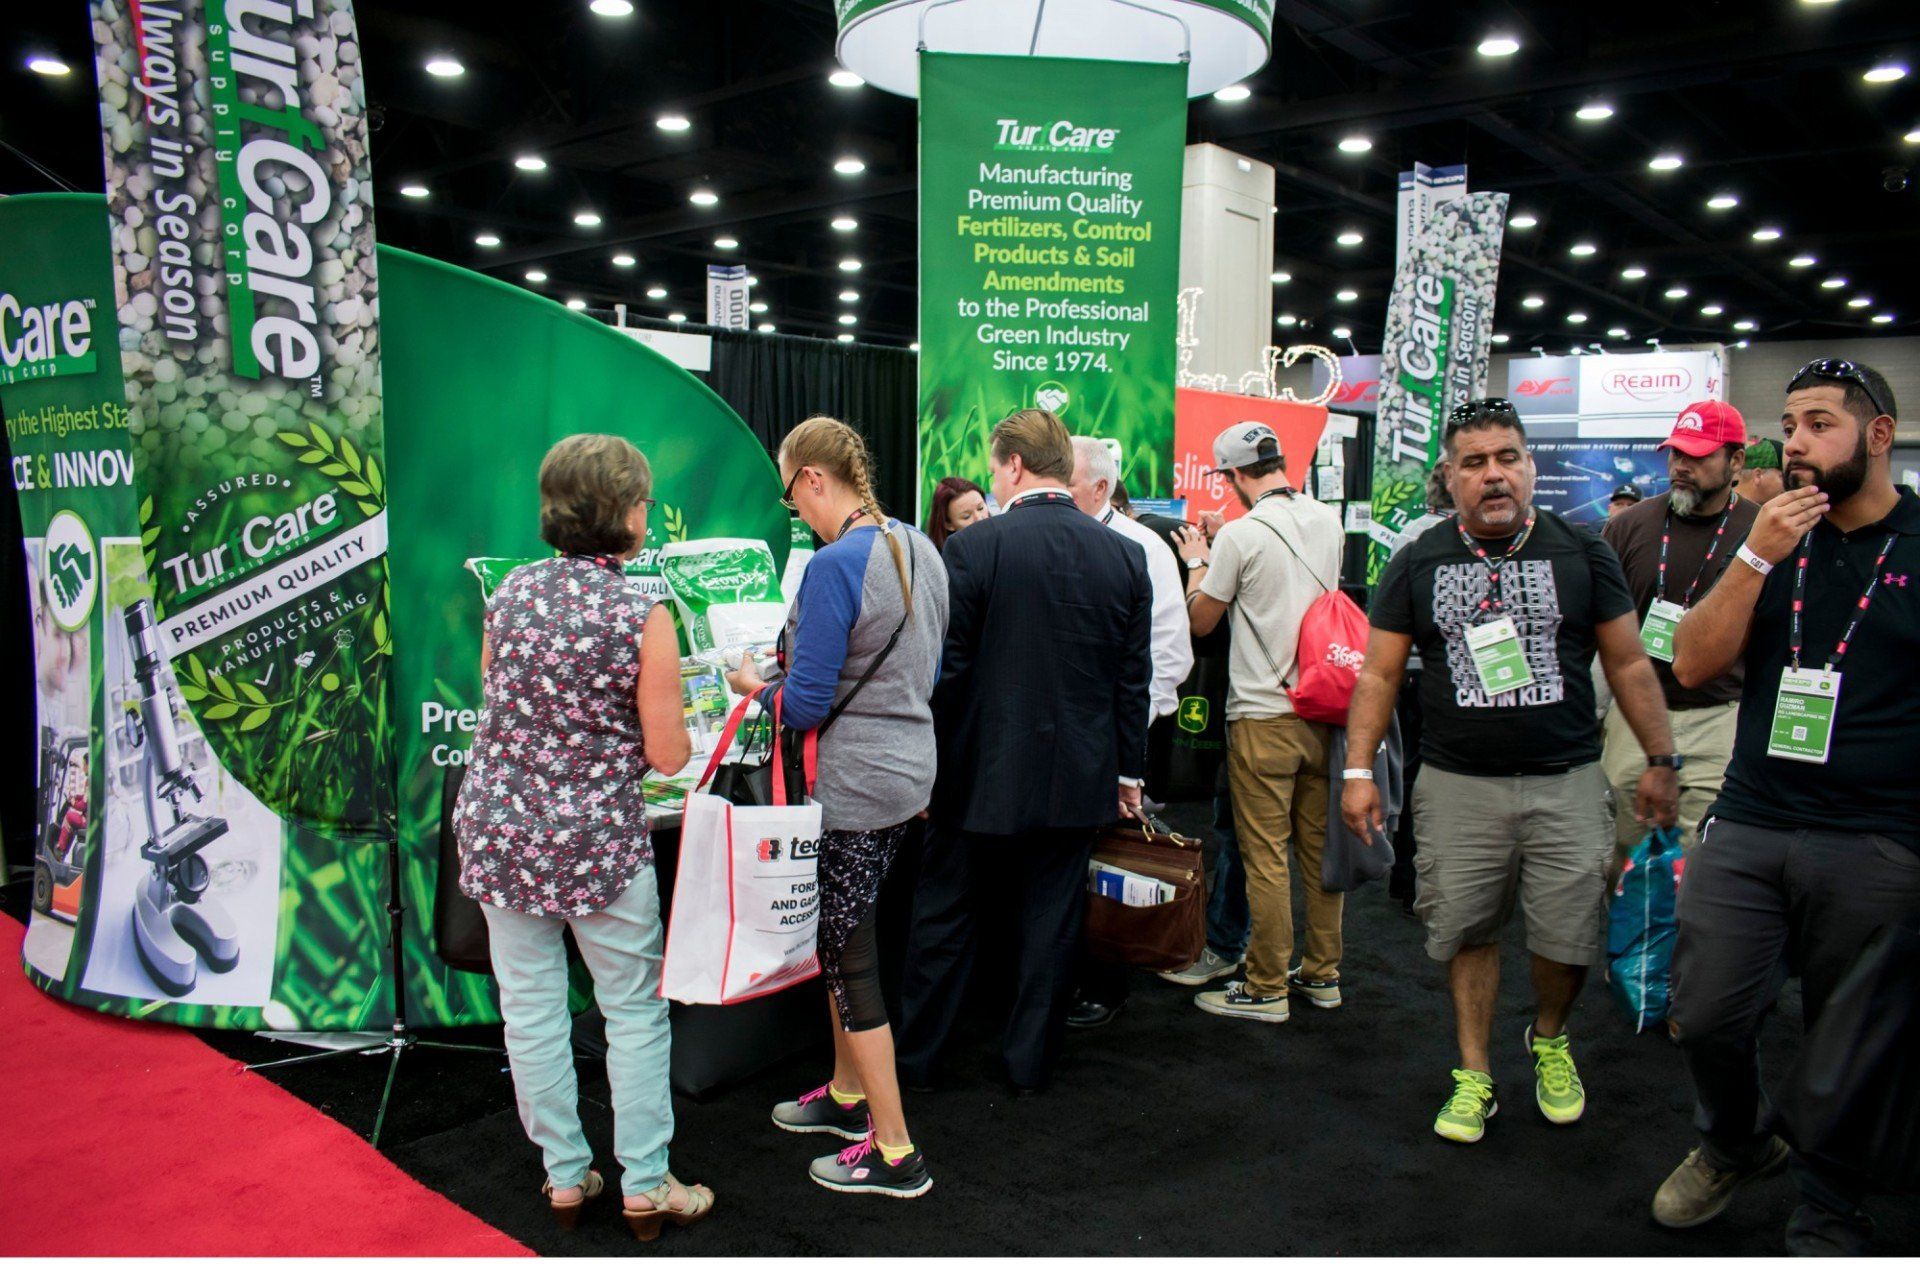 gie expo 2017 in turfcare booth